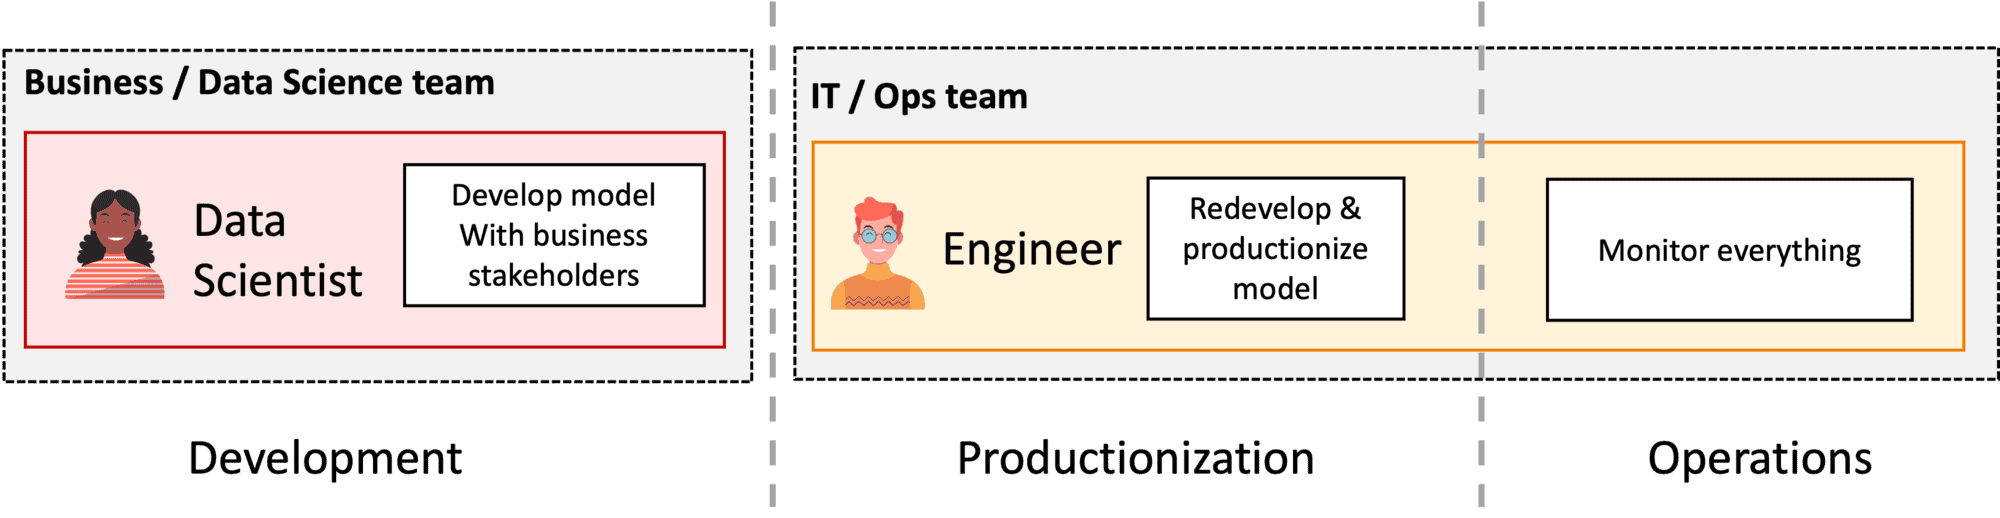 Figure 1: Team structure with split dev and ops.